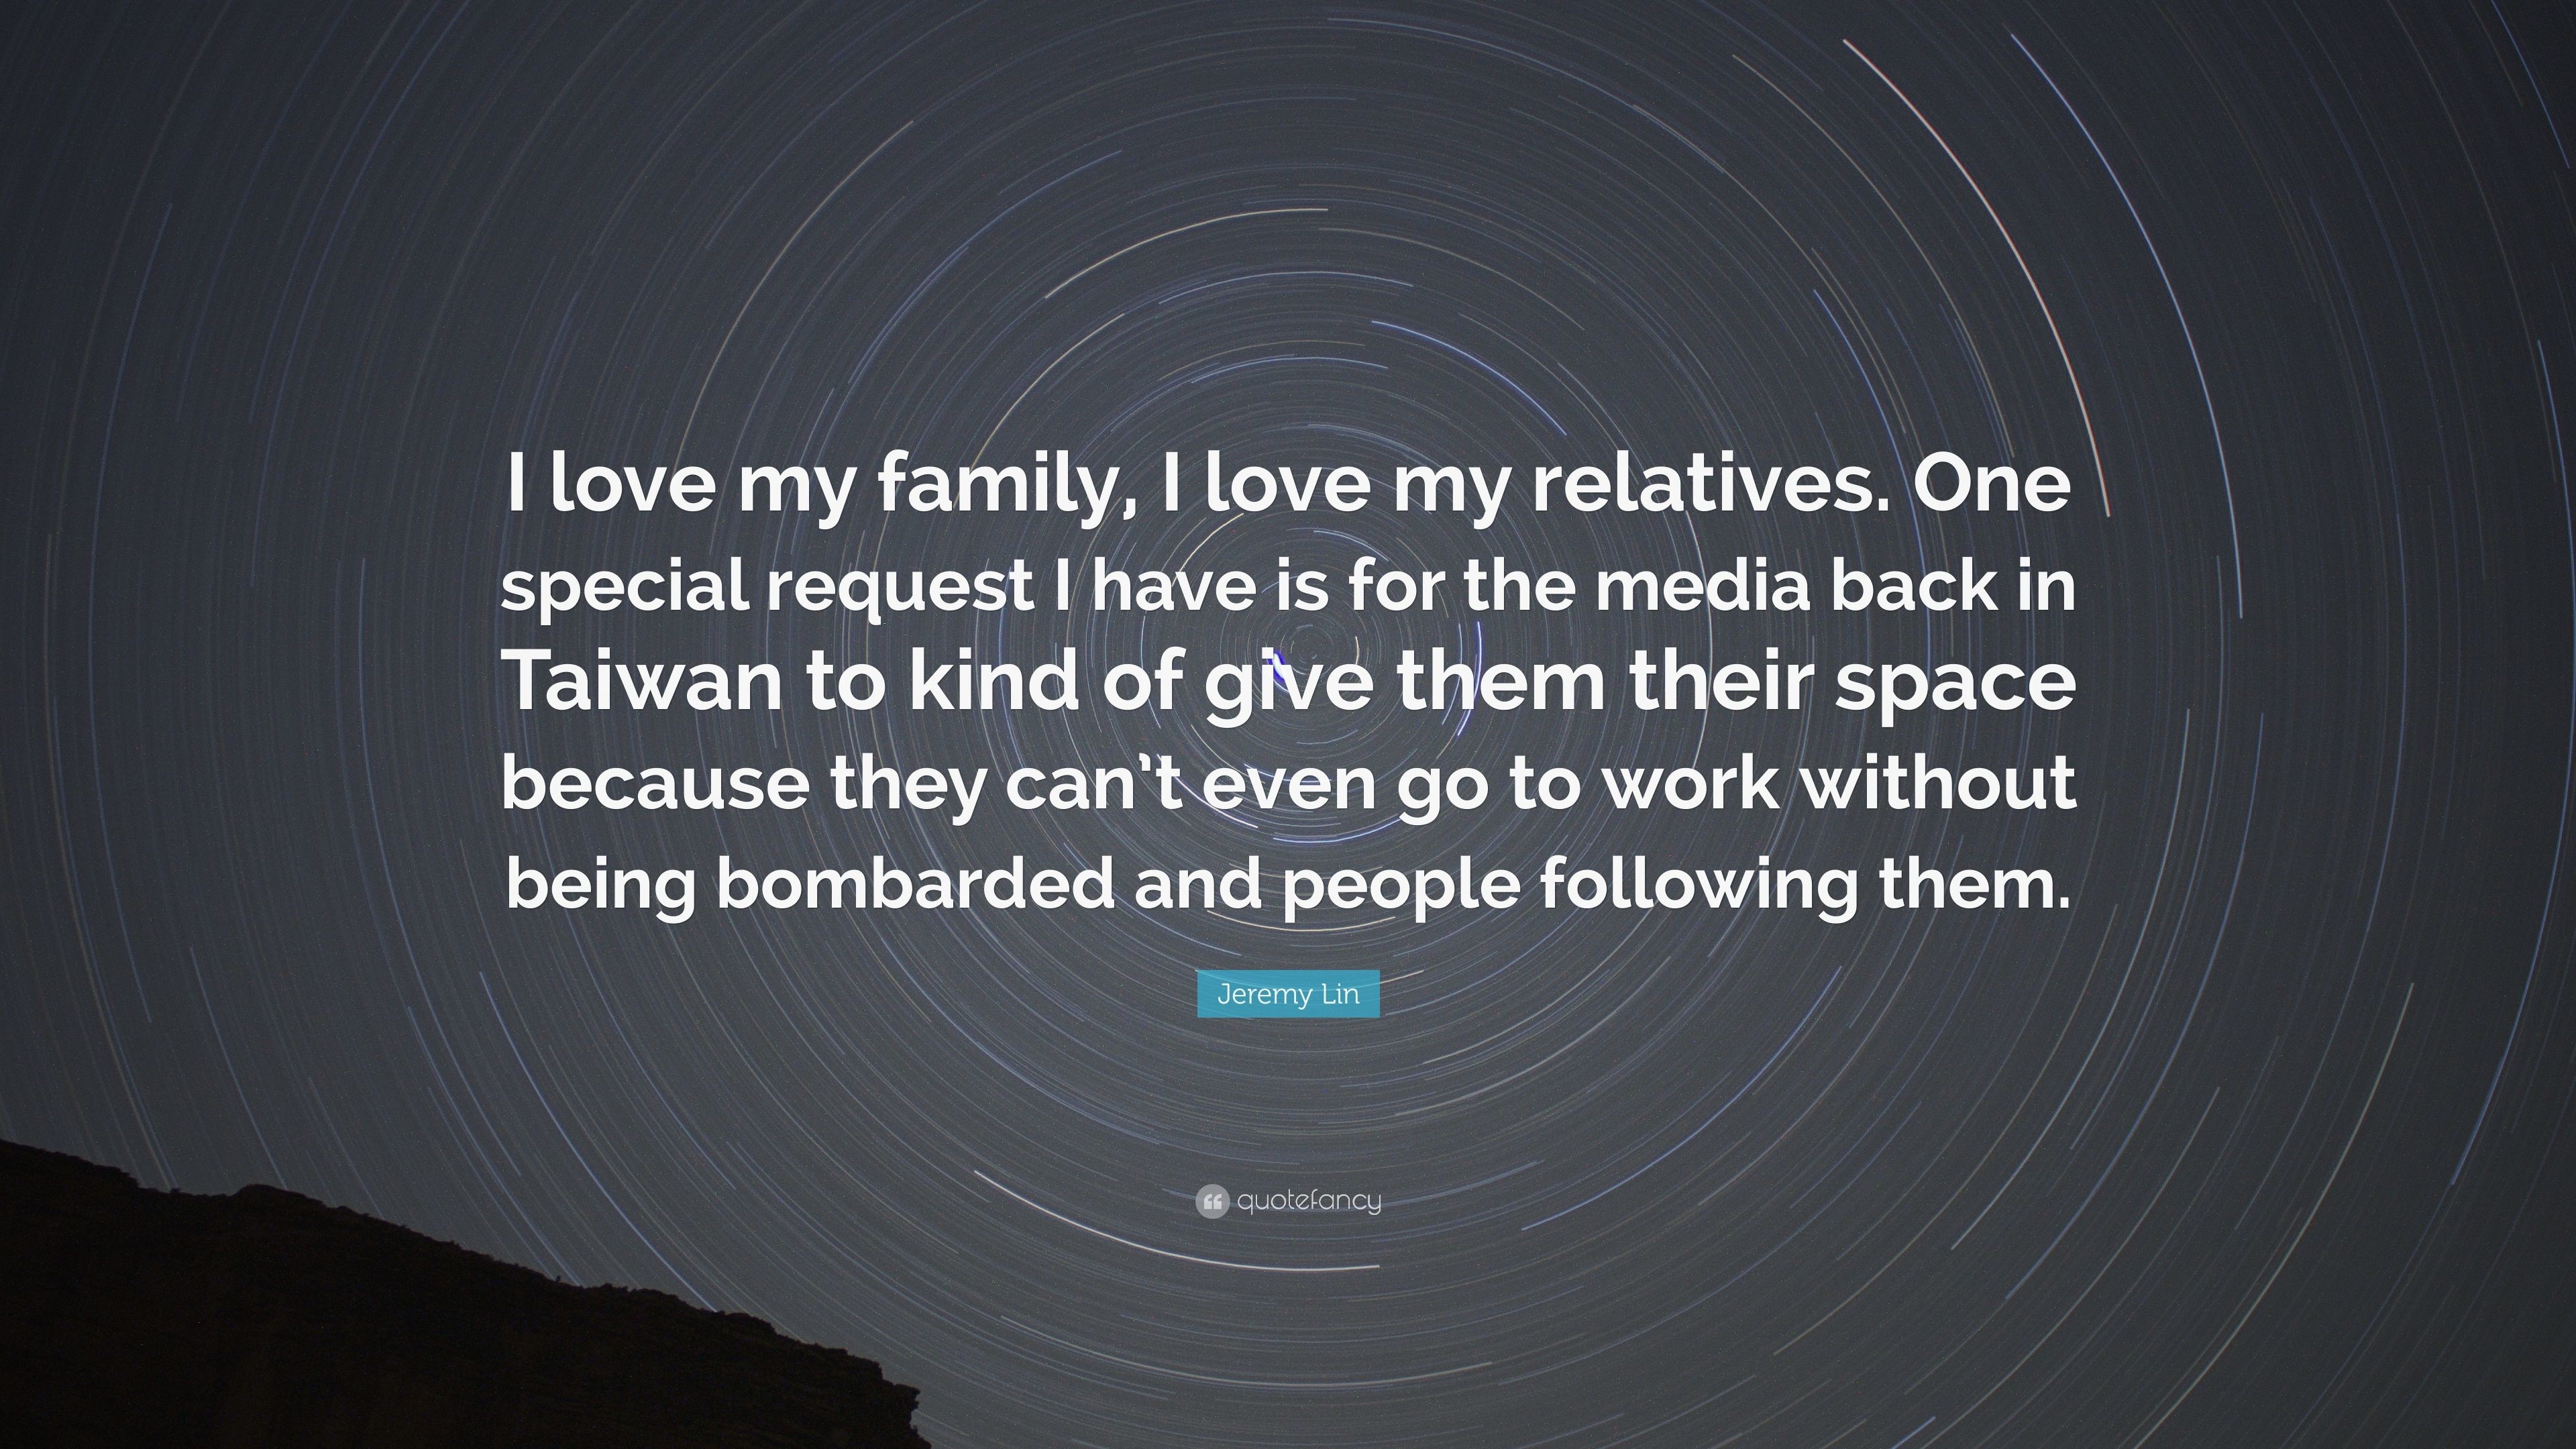 3840x2160 Jeremy Lin Quote: “I love my family, I love my relatives. One